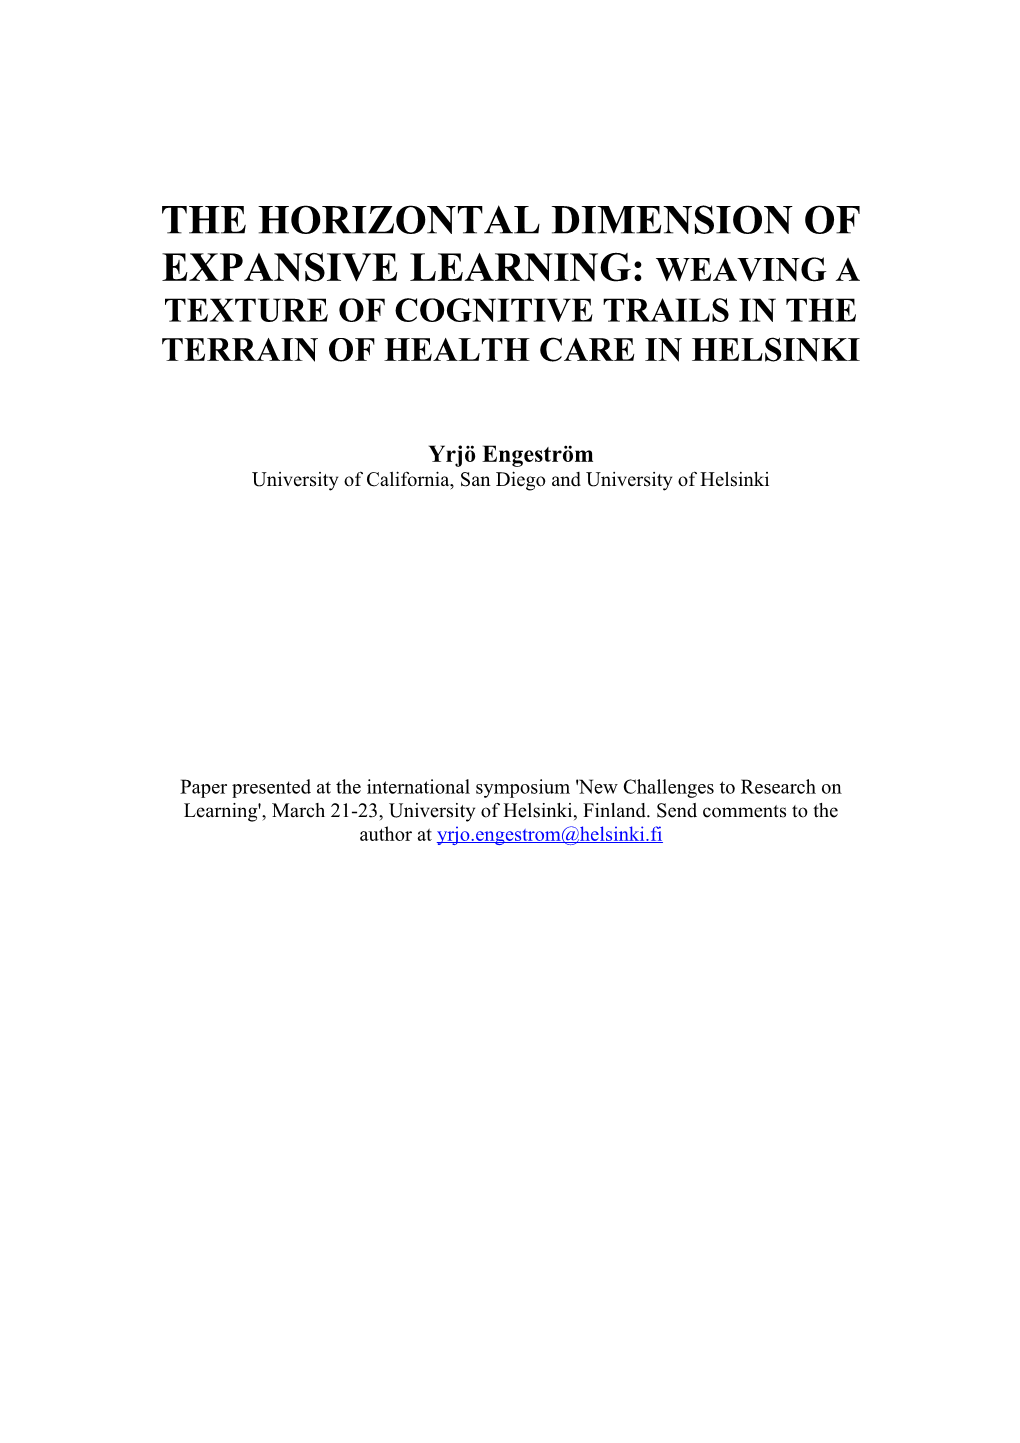 The Horizontal Dimension of Expansive Learning: Weaving a Texture of Cognitive Trails In